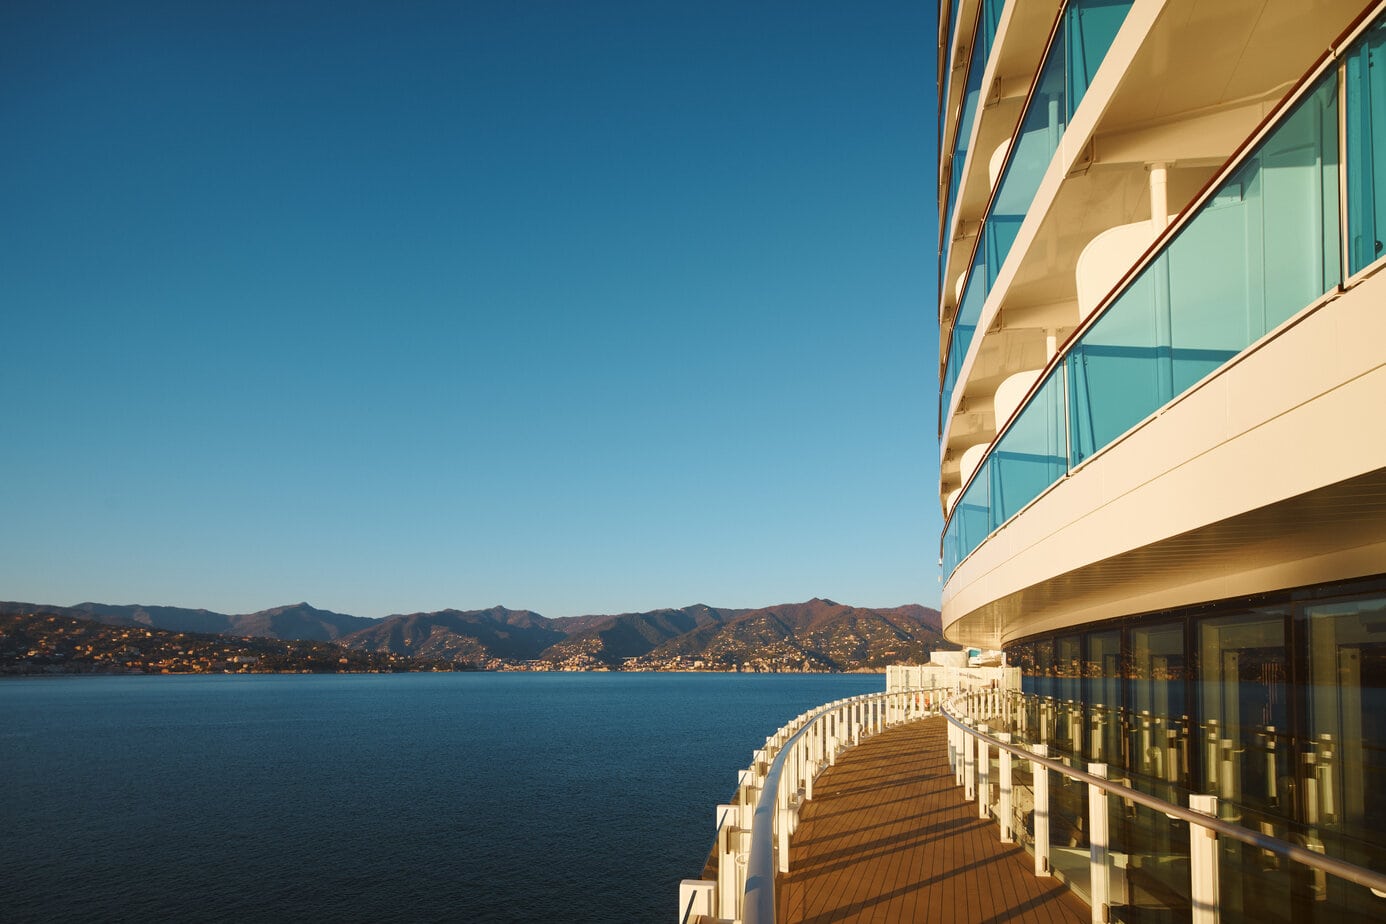 Exterior of the Costa Toscana cruise ship with a wraparound deck next to the side of the ship and the sea to the left with low green covered hills of the shore in the distance